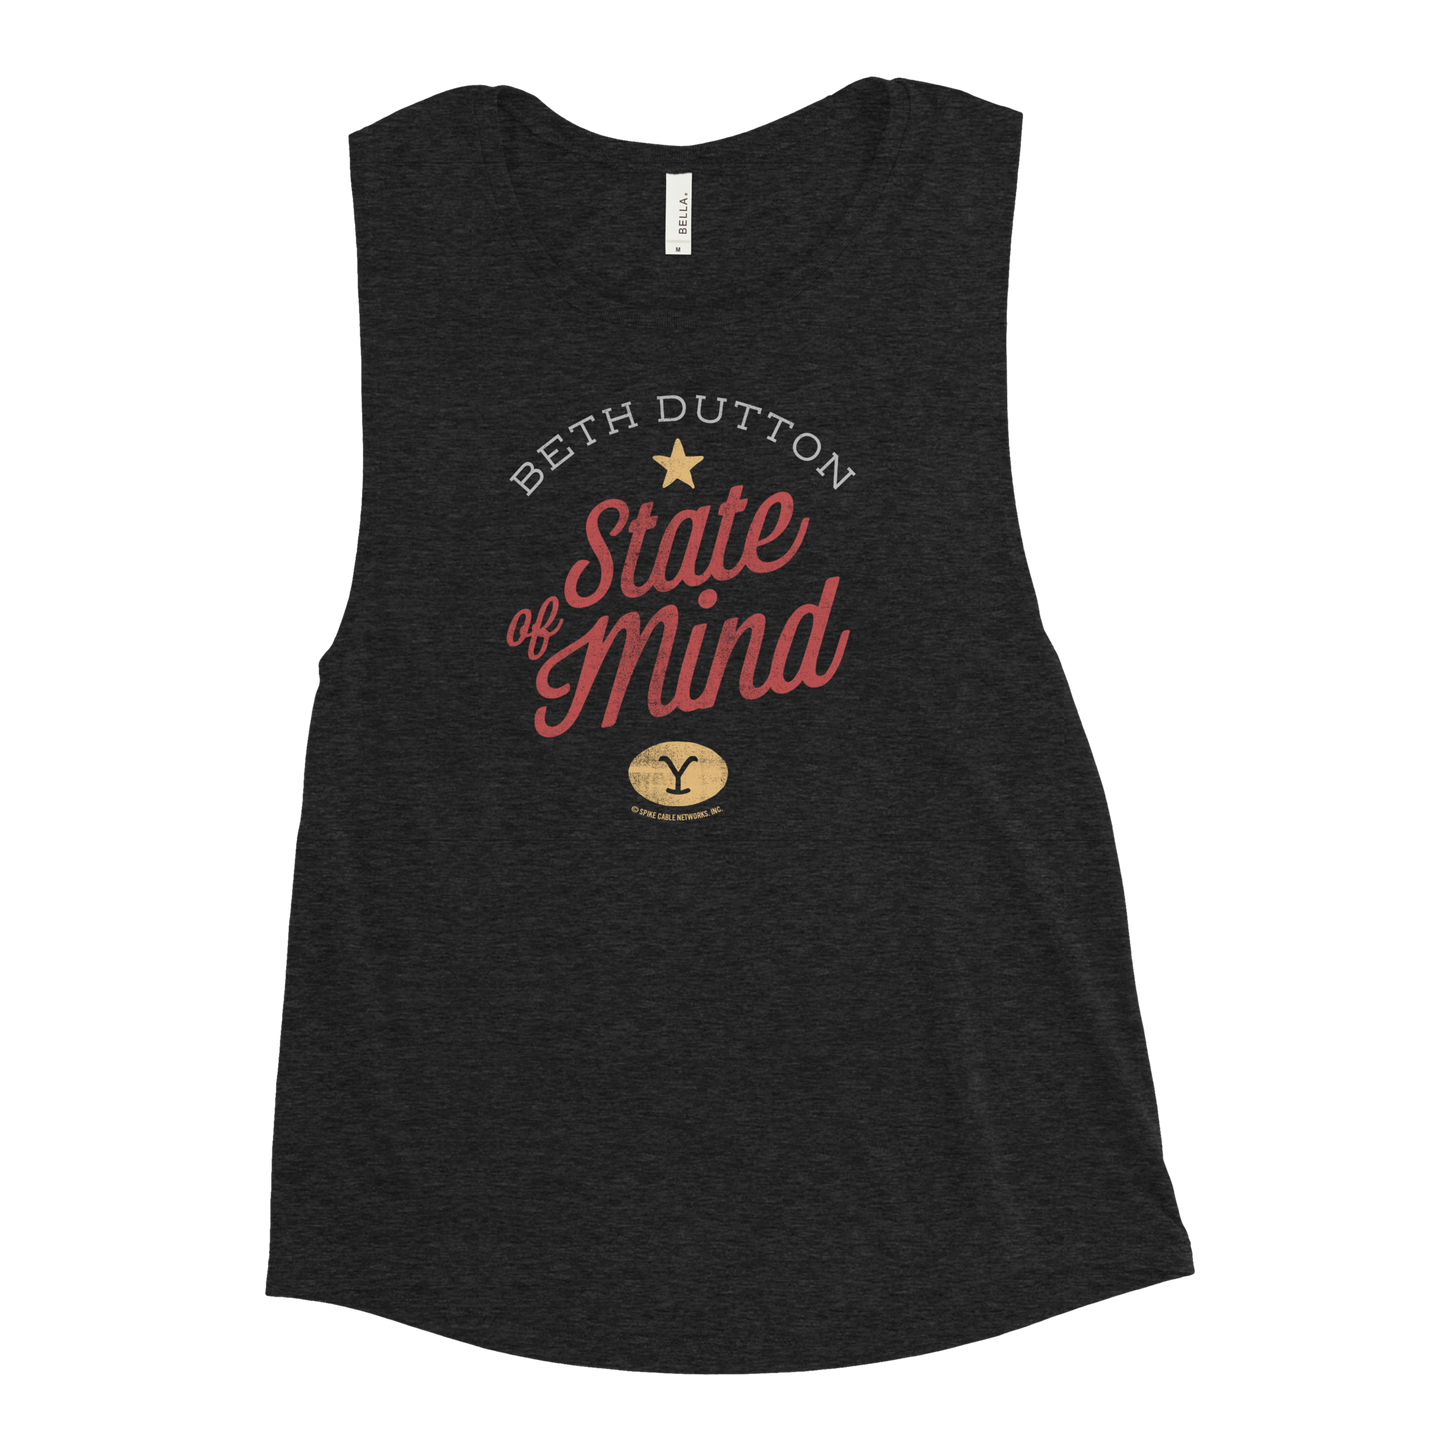 Yellowstone Beth Dutton State of Mind Women's Muscle Tank Top